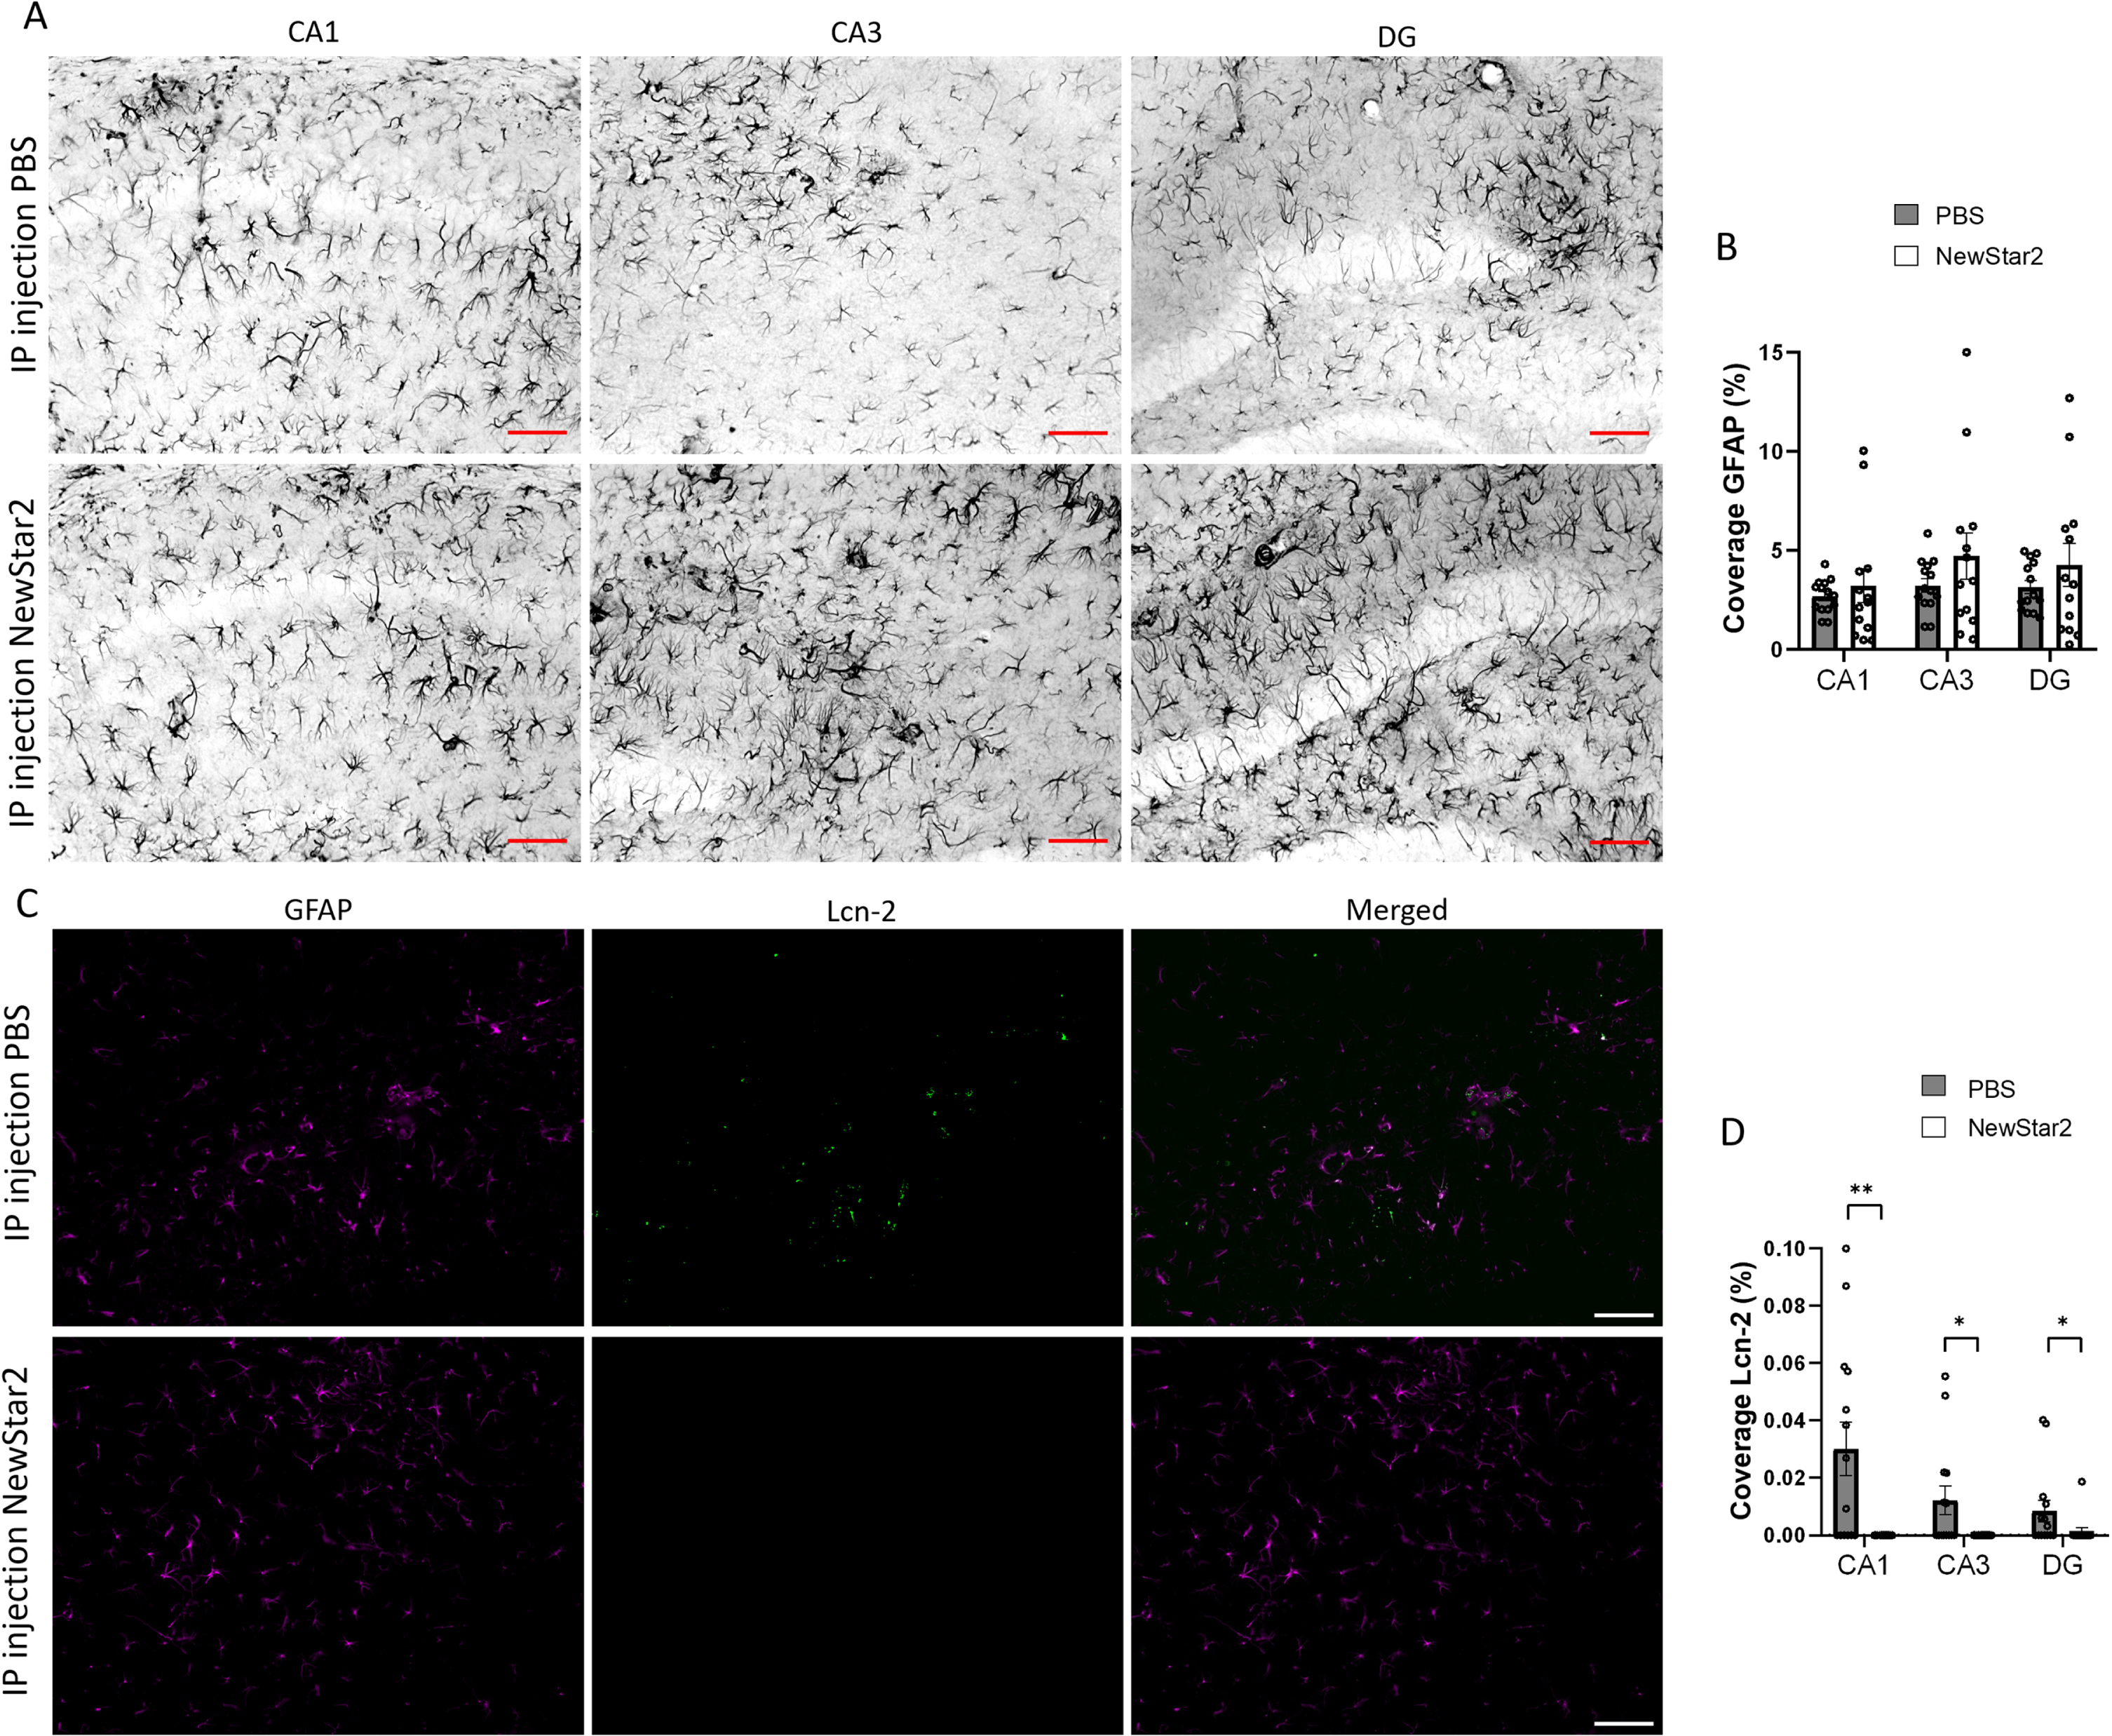 NewStar2 administration contributes to decreasing Lcn-2 expression levels. A) Representative images of activated astrocytes (GFAP) in CA1, CA3, and DG areas after PBS or NewStar2 administration (Scale bar, 100μm). B) Quantification of GFAP coverage in CA1 (p = 0.55), CA3 (p = 0.21), and DG (p = 0.30) hippocampal areas (PBS, n = 14; NewStar2, n = 14, unpaired t-test). C) Sections were stained with anti-GFAP (magenta) for activated astrocytes and anti-Lcn-2 (green). Representative images of the CA1 area are shown (Scale bar, 100μm). D) Quantification of Lcn-2 coverage in CA1 (p = 0.0019), CA3 (p = 0.015), and DG (p = 0.025) hippocampal areas (PBS, n = 14; NewStar2, n = 14, unpaired t-test). Data are presented as mean±SEM. *p < 0.05; **p < 0.01.